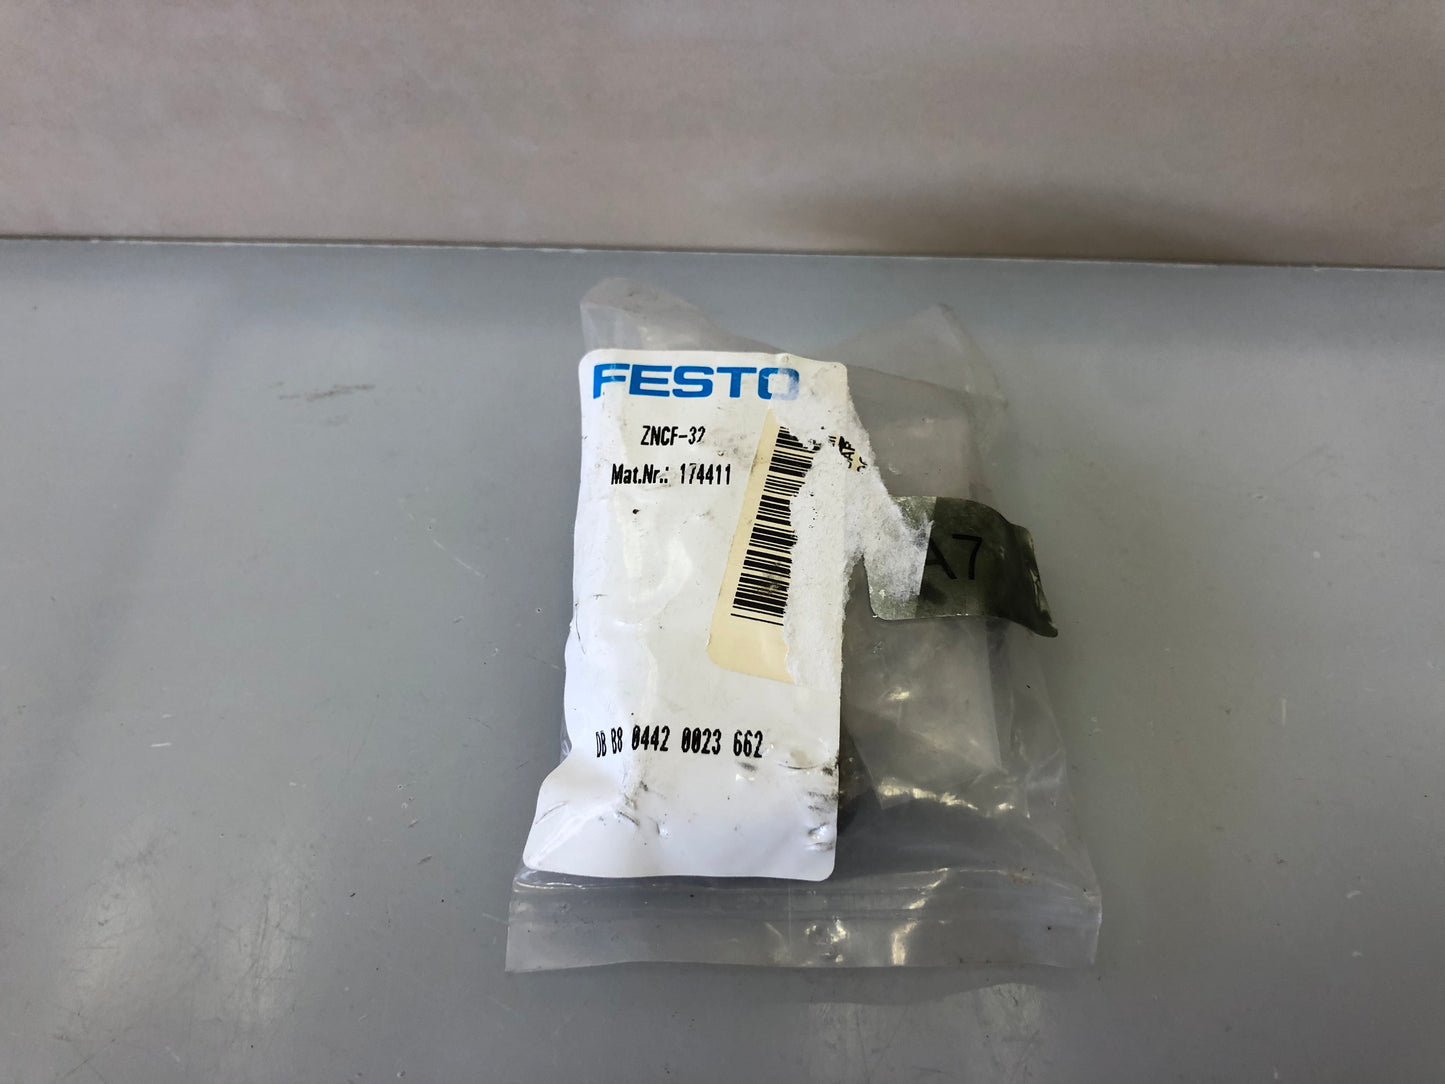 Festo ZNCF-32 Mounting Flange, Trunnion, Stainless Steel Casting